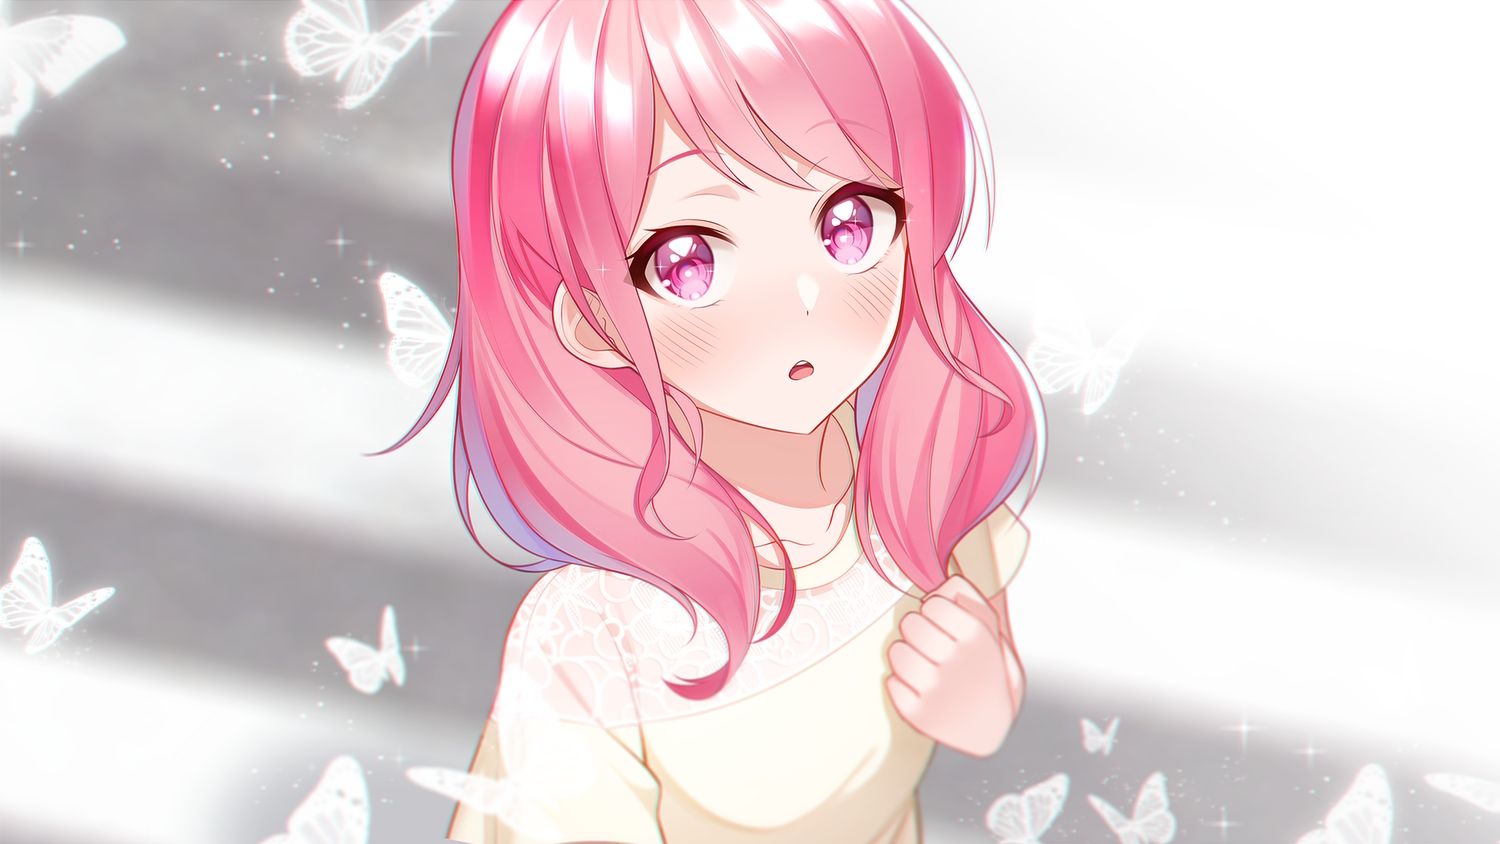 3. Anime girl with pink hair and blue eyes - wide 10